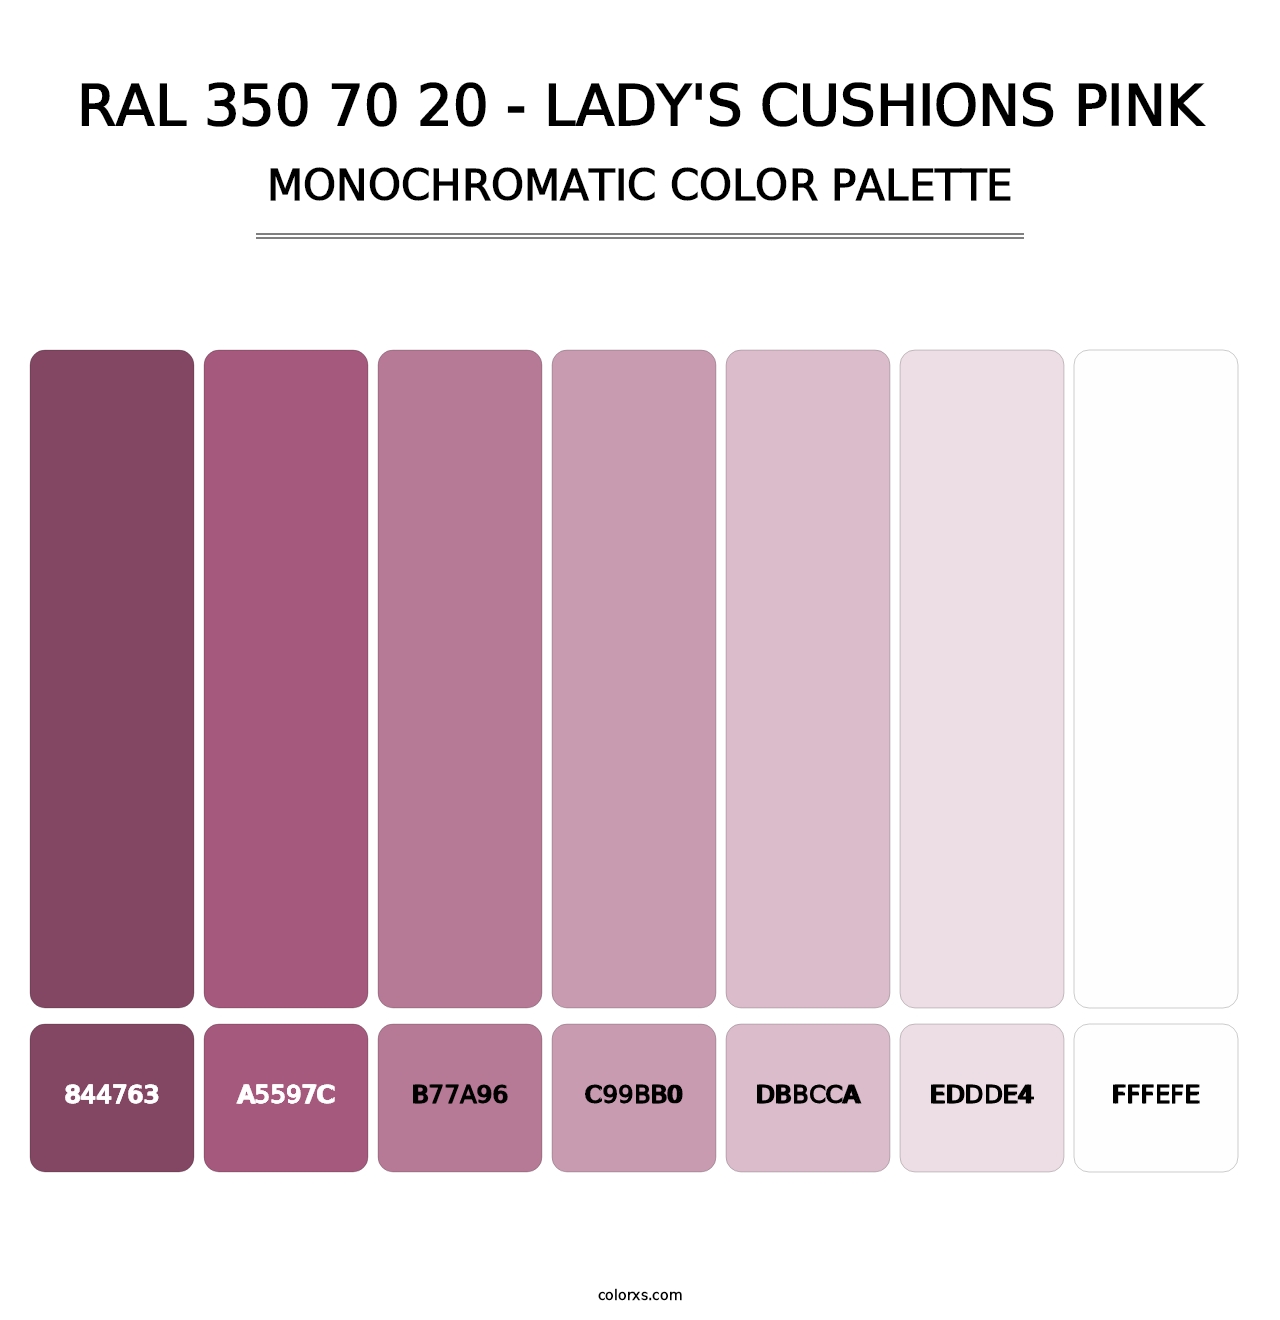 RAL 350 70 20 - Lady's Cushions Pink - Monochromatic Color Palette